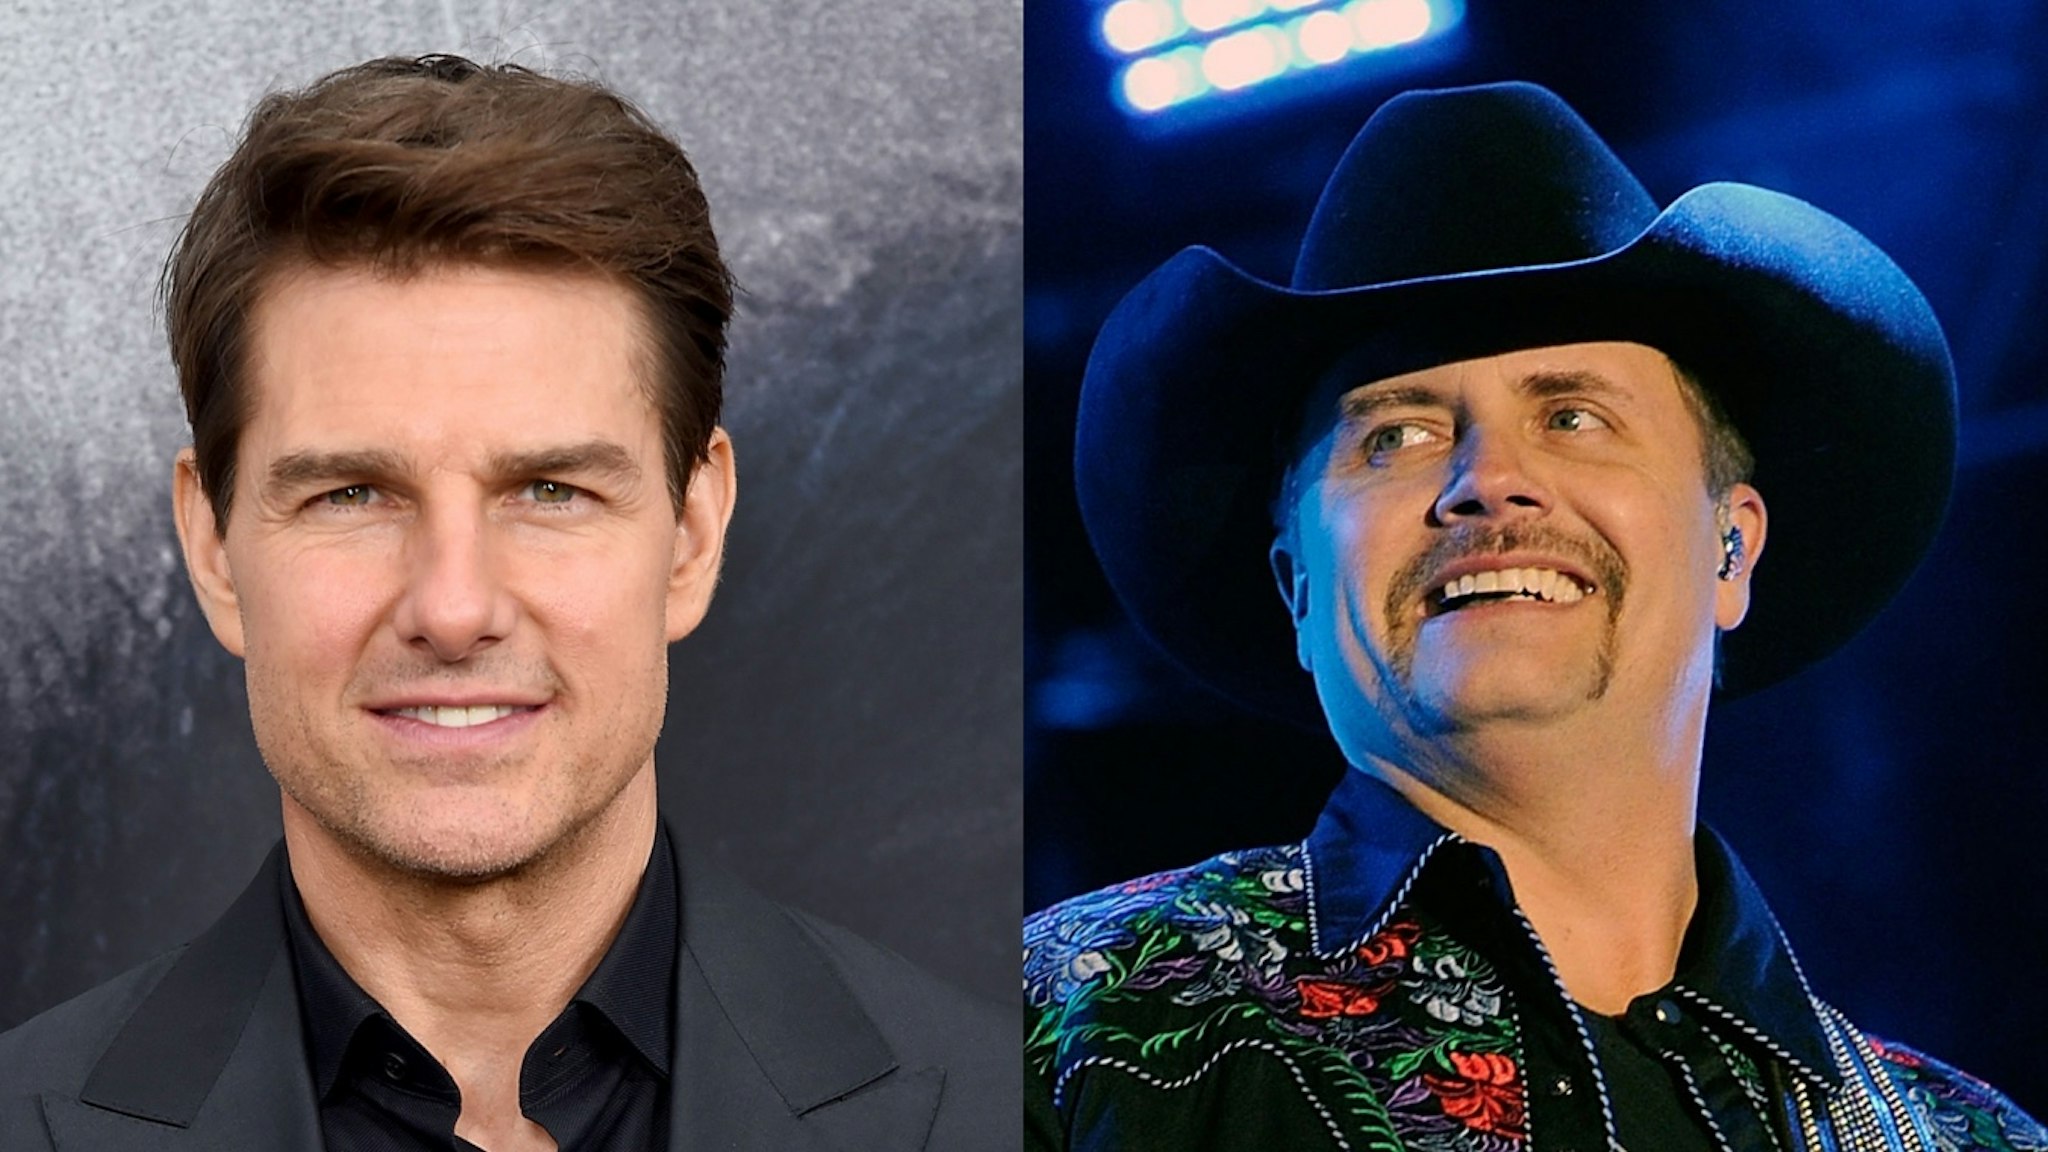 Tom cruise attends the "The Mummy" New York Fan Eventat AMC Loews Lincoln Square on June 6, 2017 in New York City. John Rich of the band Big and Rich performs at the Bridgestone Winter Park Honda Stage at IntelliCentrics Outdoor Concert Series on January 28, 2016 in Nashville, Tennessee.